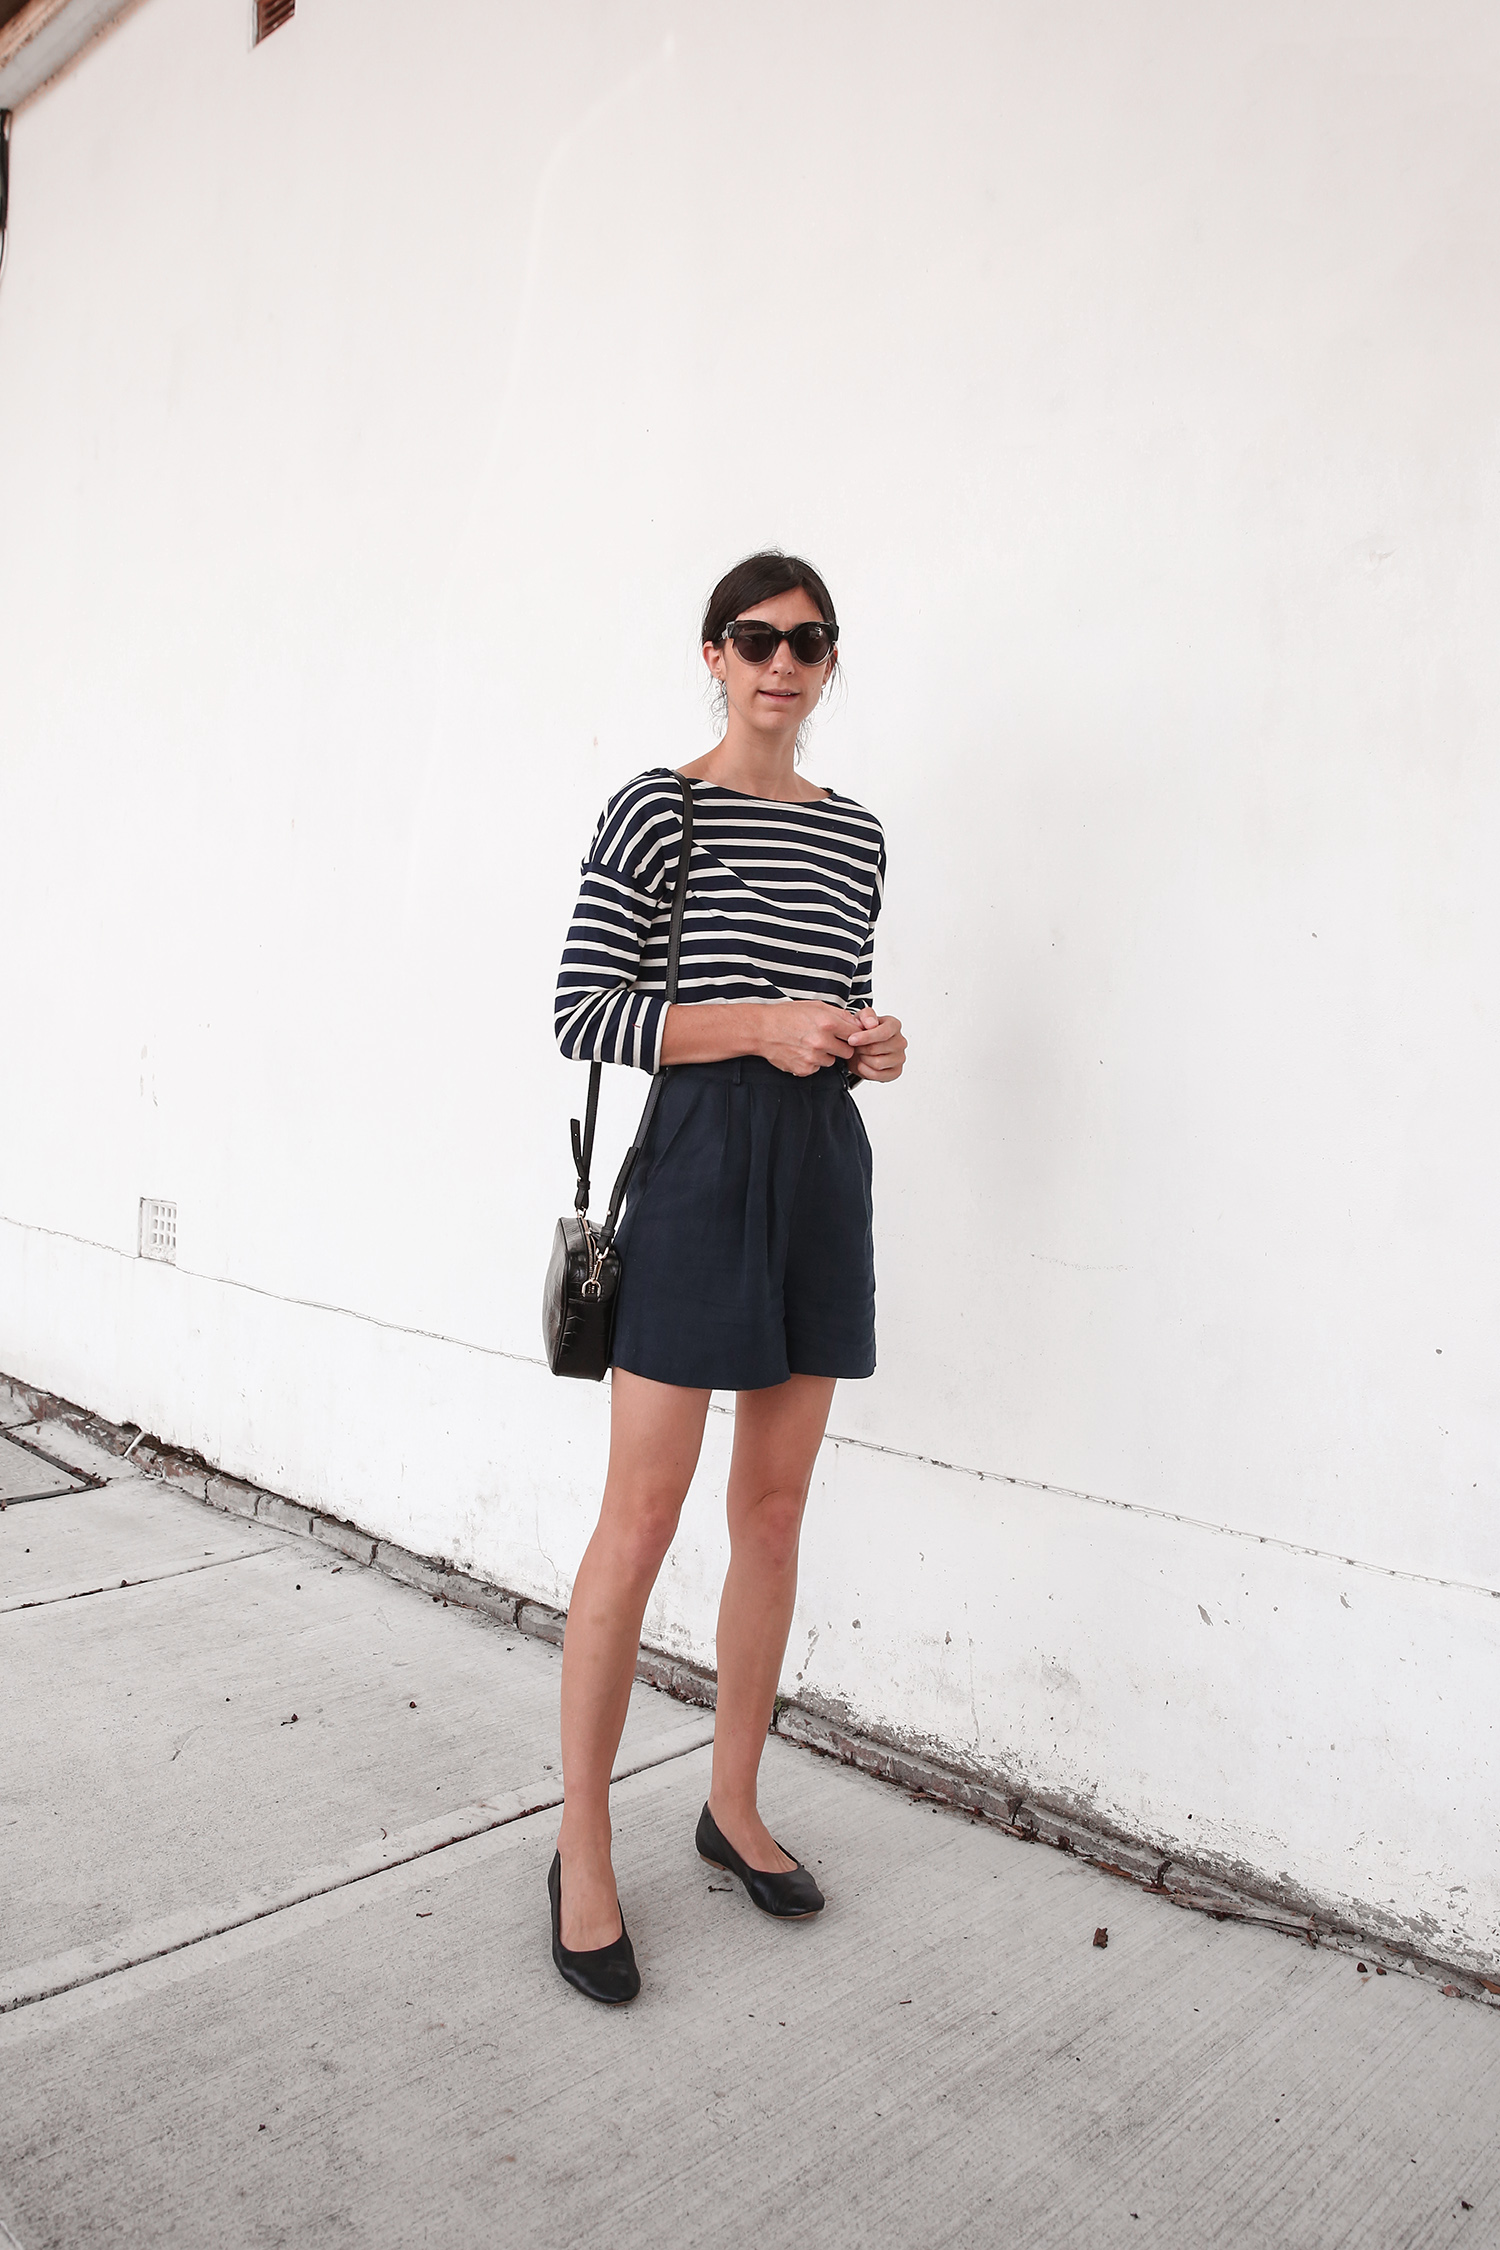 Boden navy white striped top with Among navy herringbone shorts